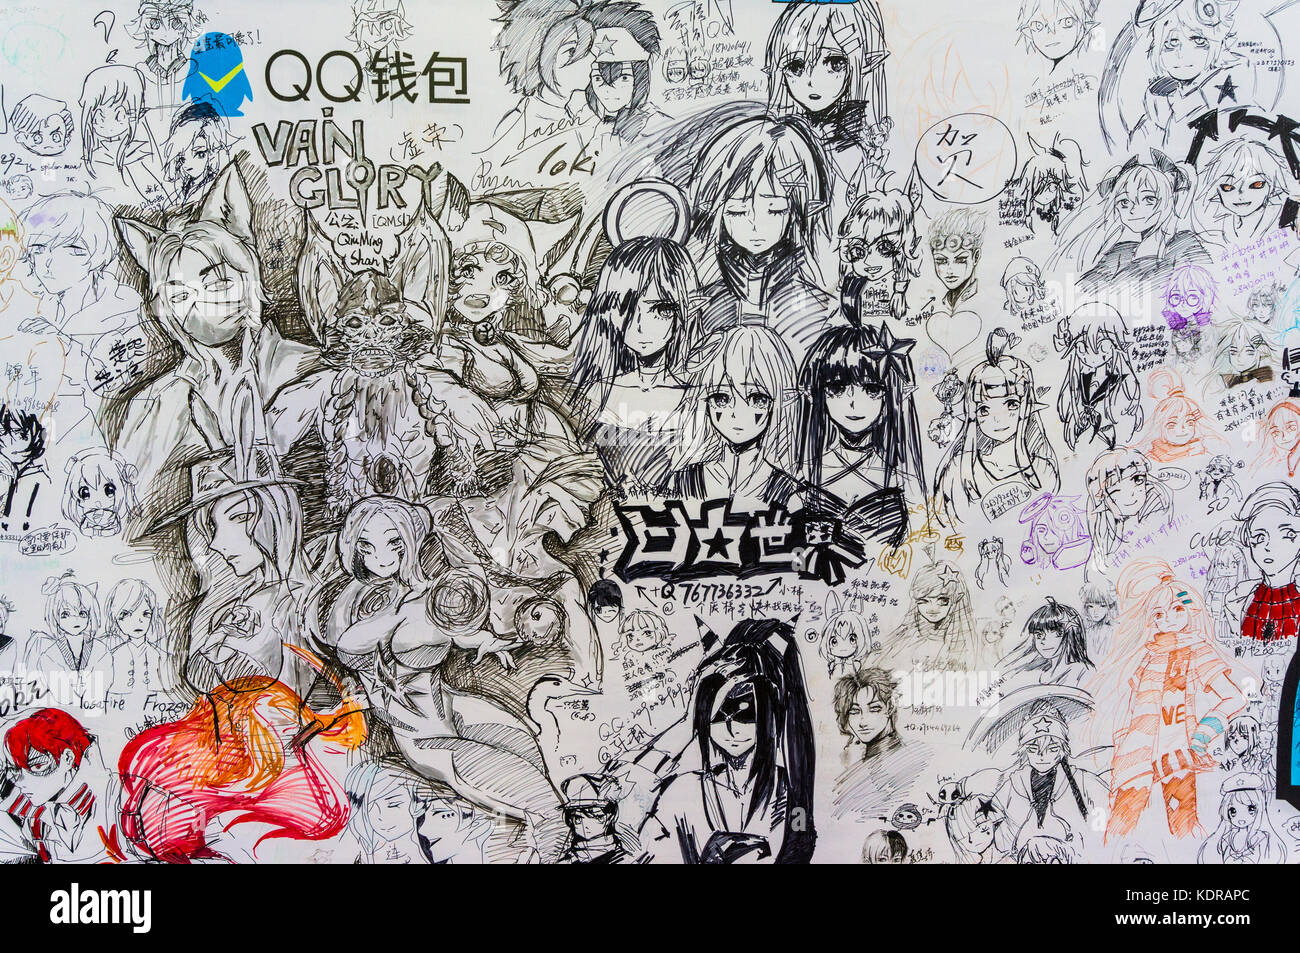 Pen and ink doodles based on anime characters at a gaming fair 'graffitii  wall' in Shenzhen, China Stock Photo - Alamy